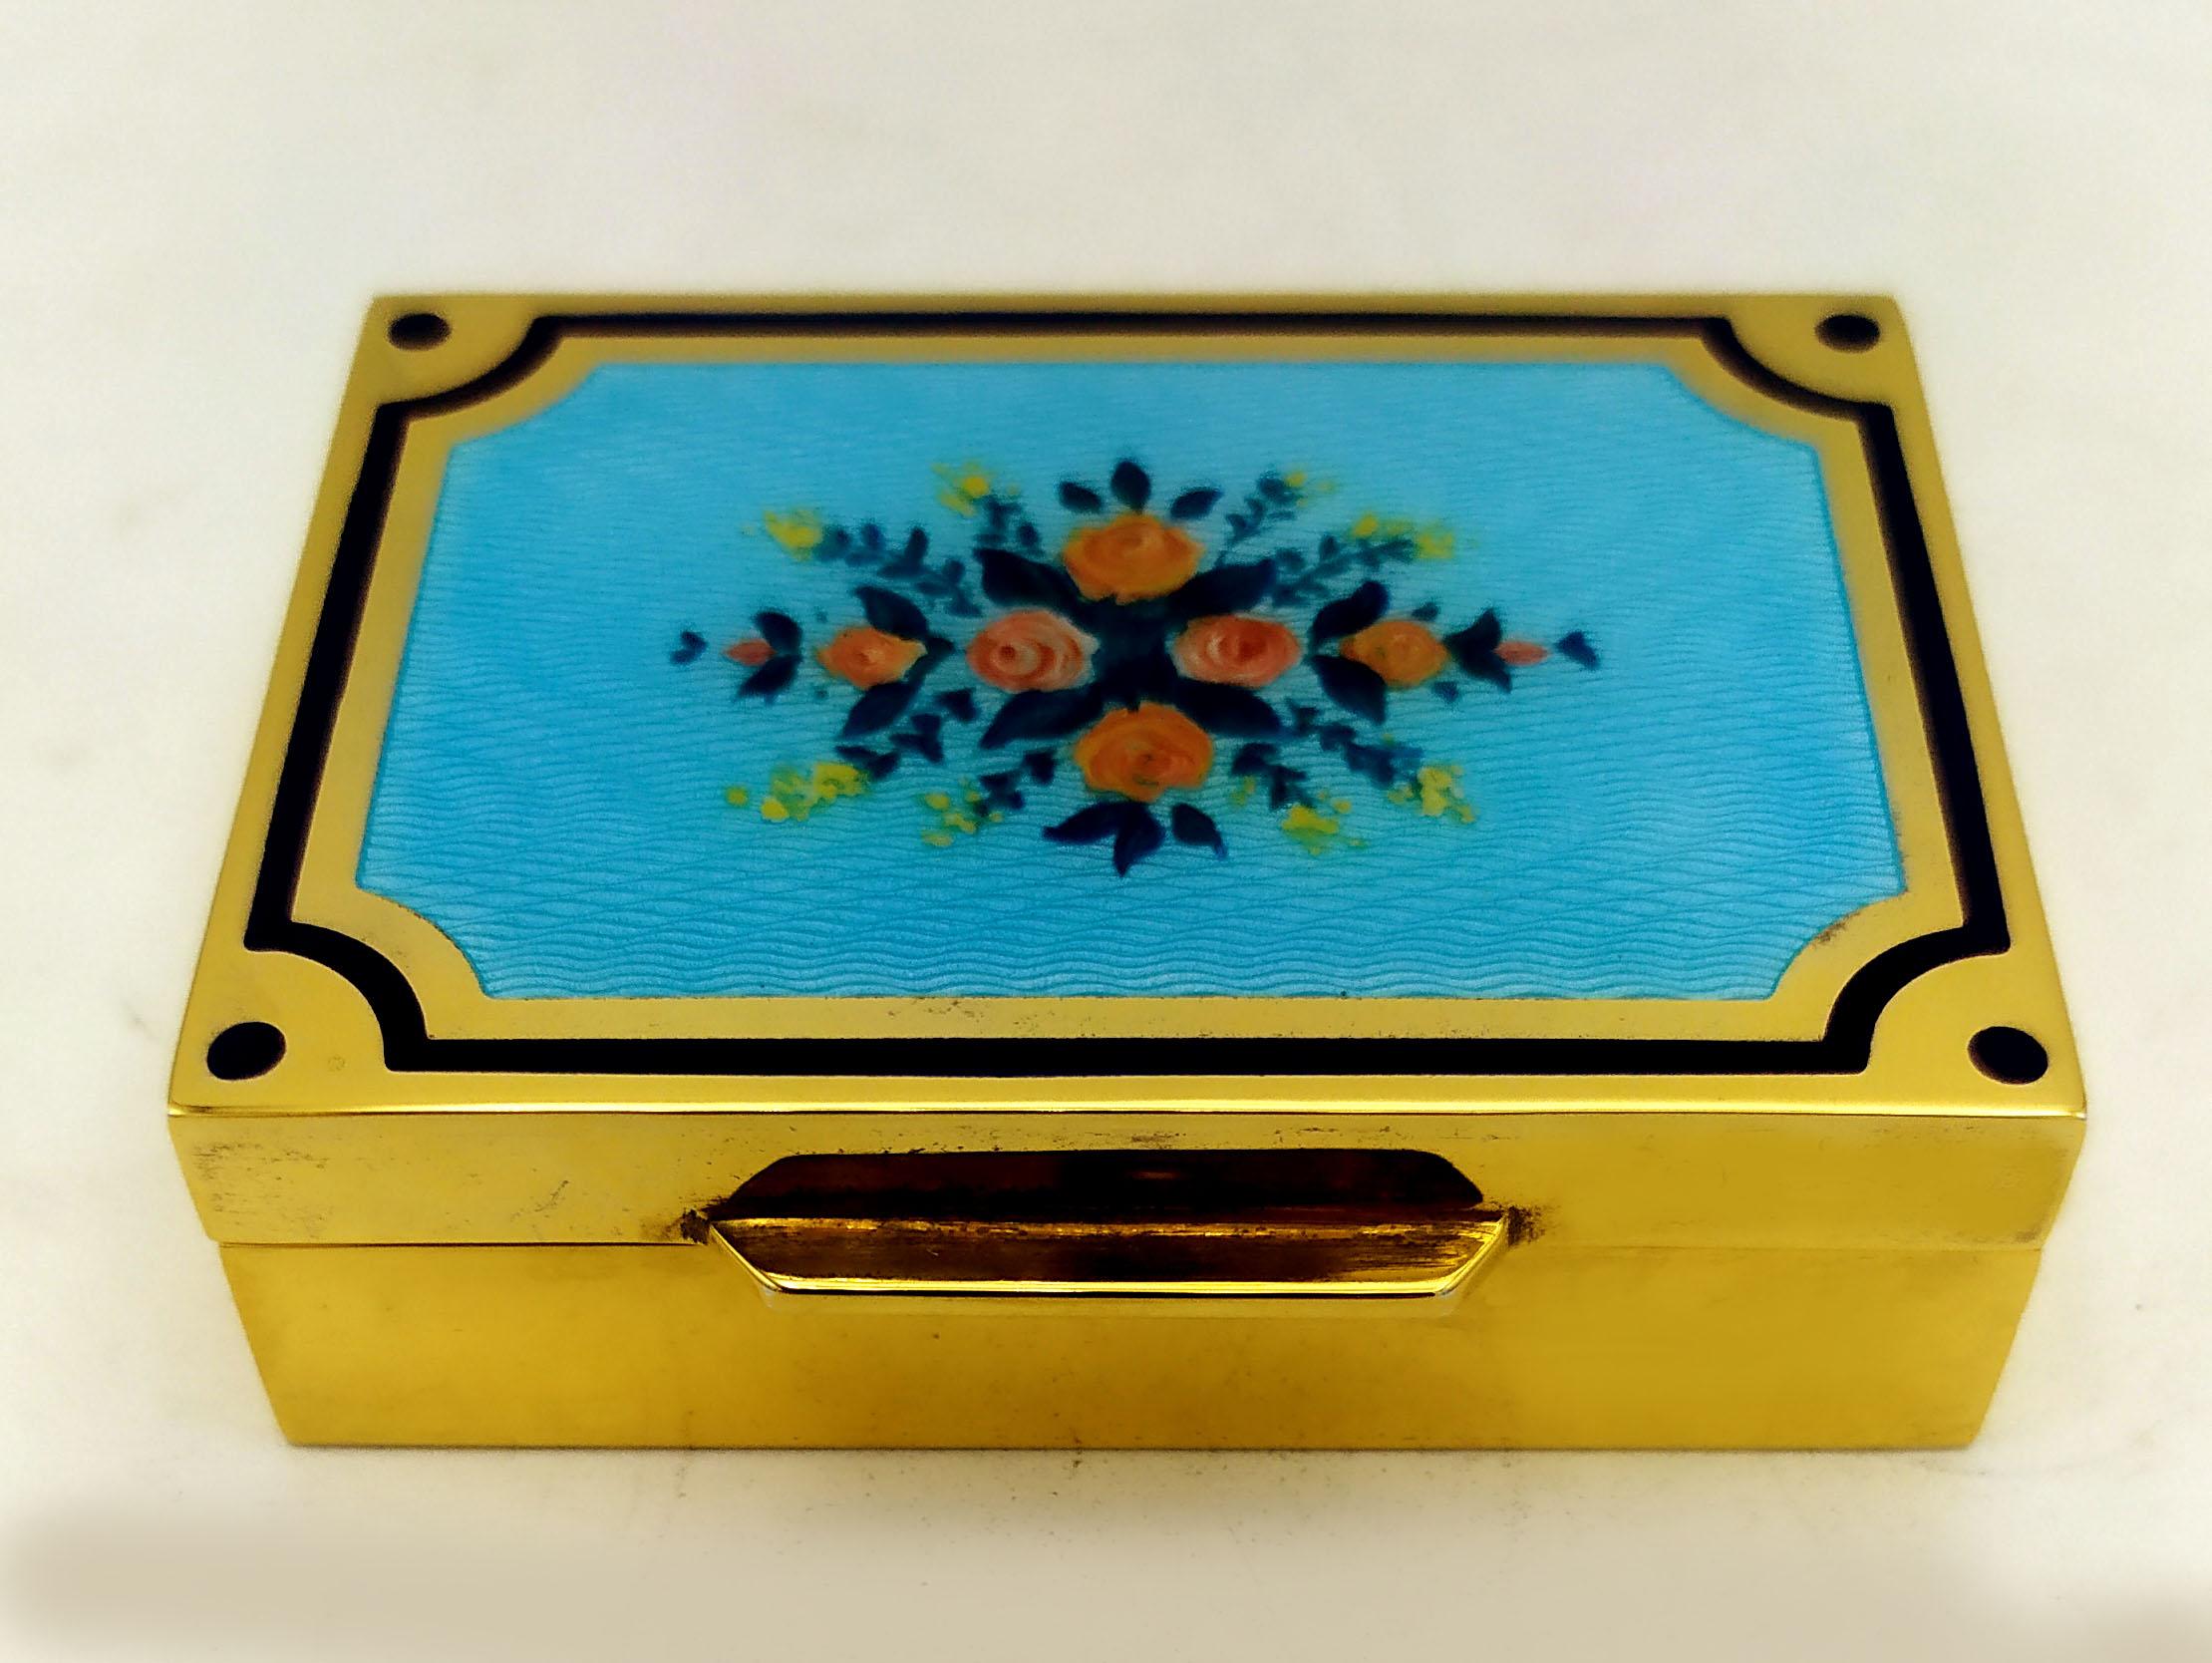 Rectangular table snuffbox in 925/1000 sterling silver gold plated with translucent enamels fired on guilloche and hand-painted floral miniature; external blue staff. Art Nouveau style from the early 1900s. Measurement cm. 5 x 6.8 x 2. Weight gr.